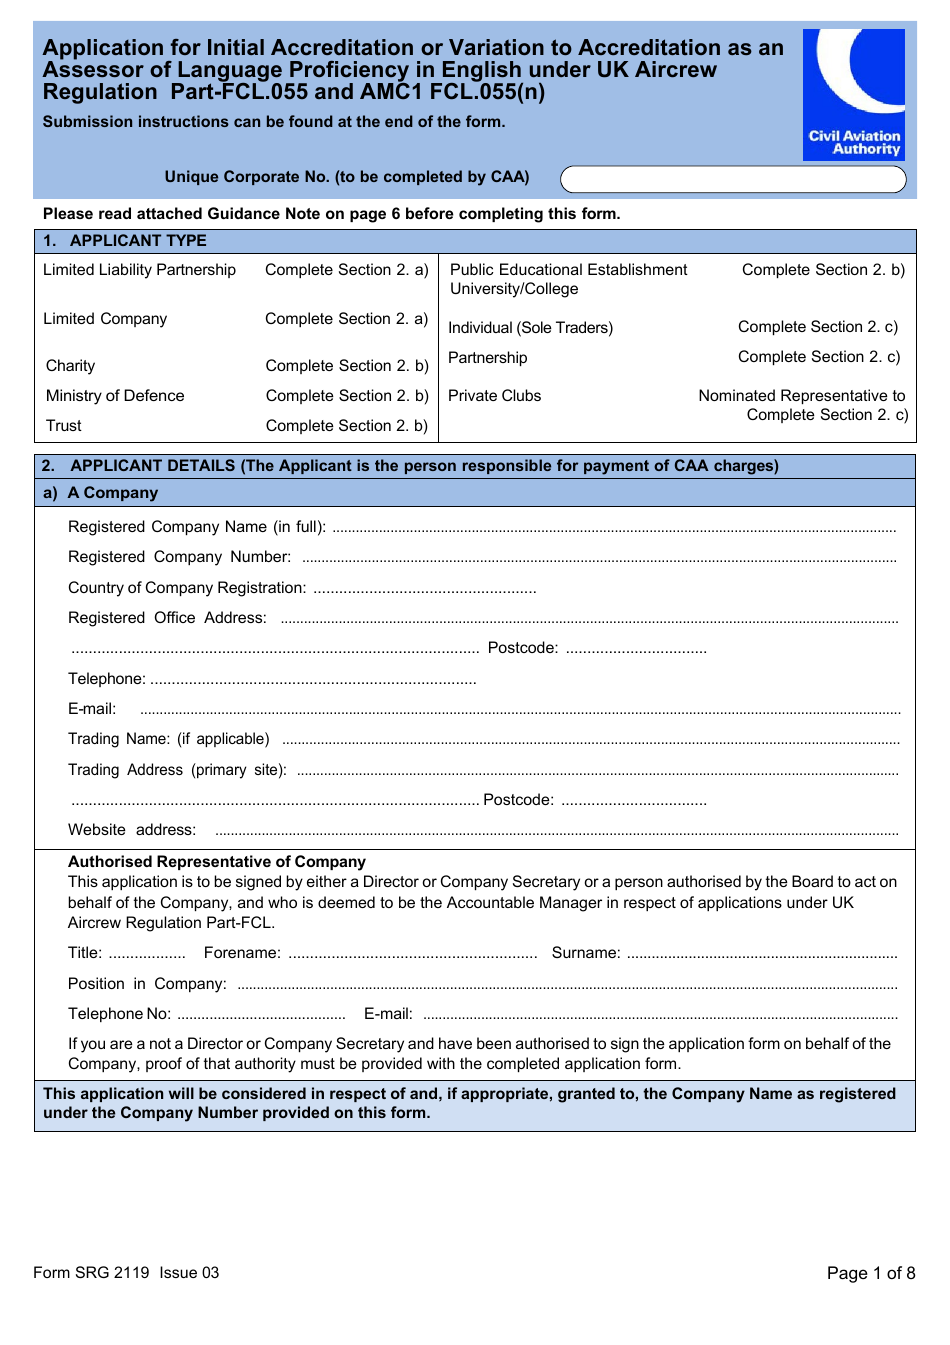 Form SRG2119 Application for Initial Accreditation or Variation to Accreditation as an Assessor of Language Proficiency in English Under UK Aircrew Regulation Part-Fcl.055 and Amc1 Fcl.055(N) - United Kingdom, Page 1